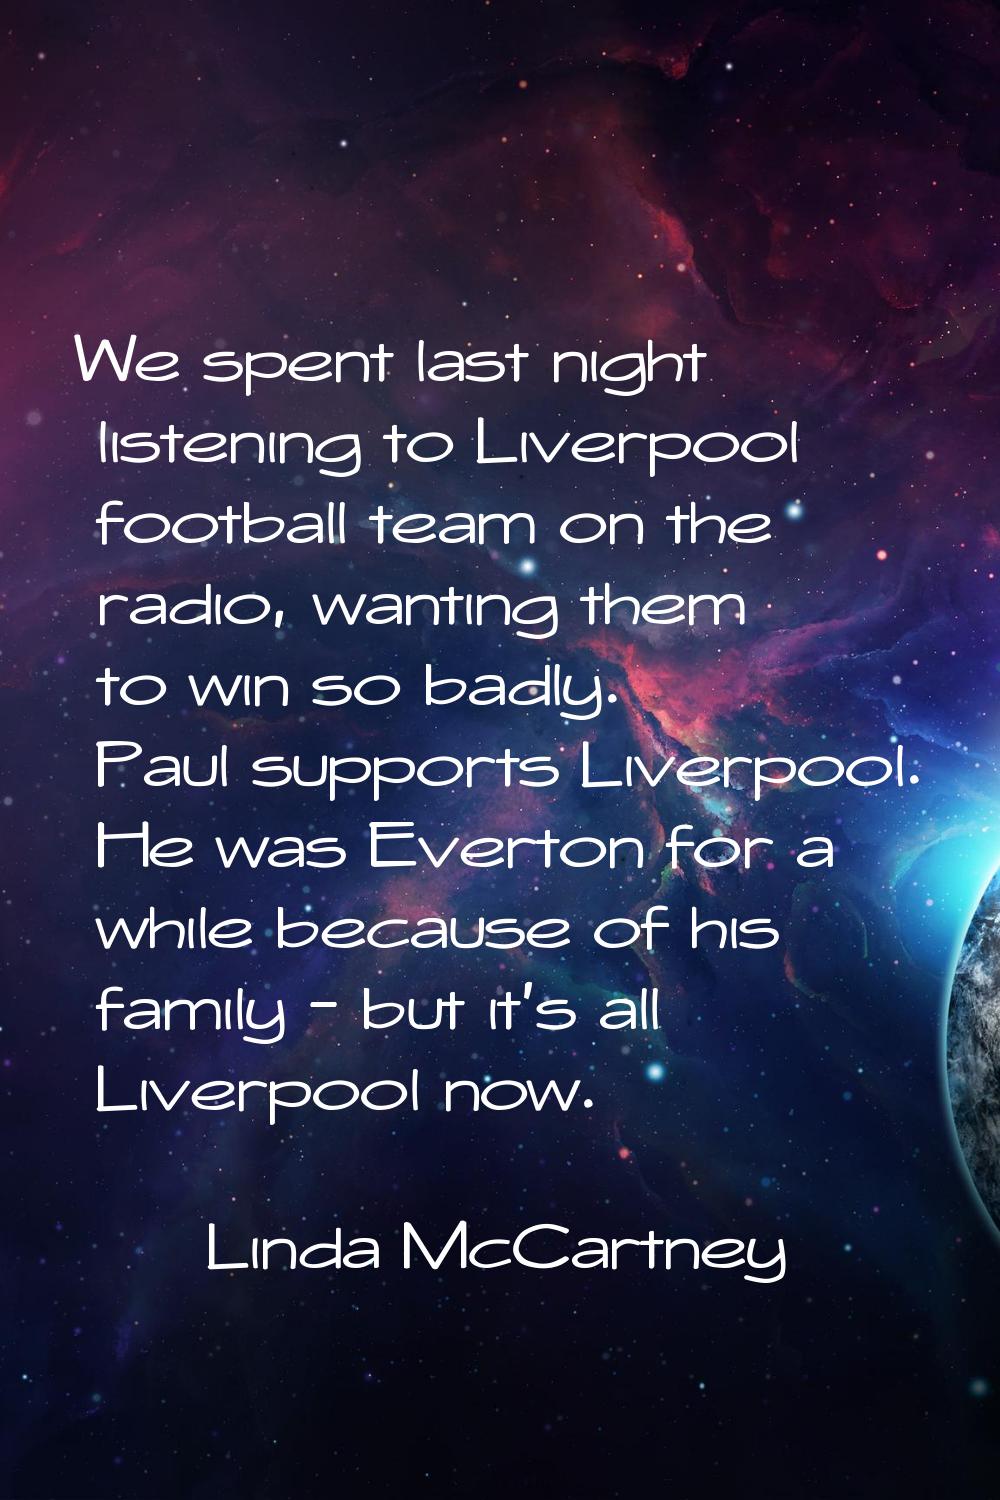 We spent last night listening to Liverpool football team on the radio, wanting them to win so badly